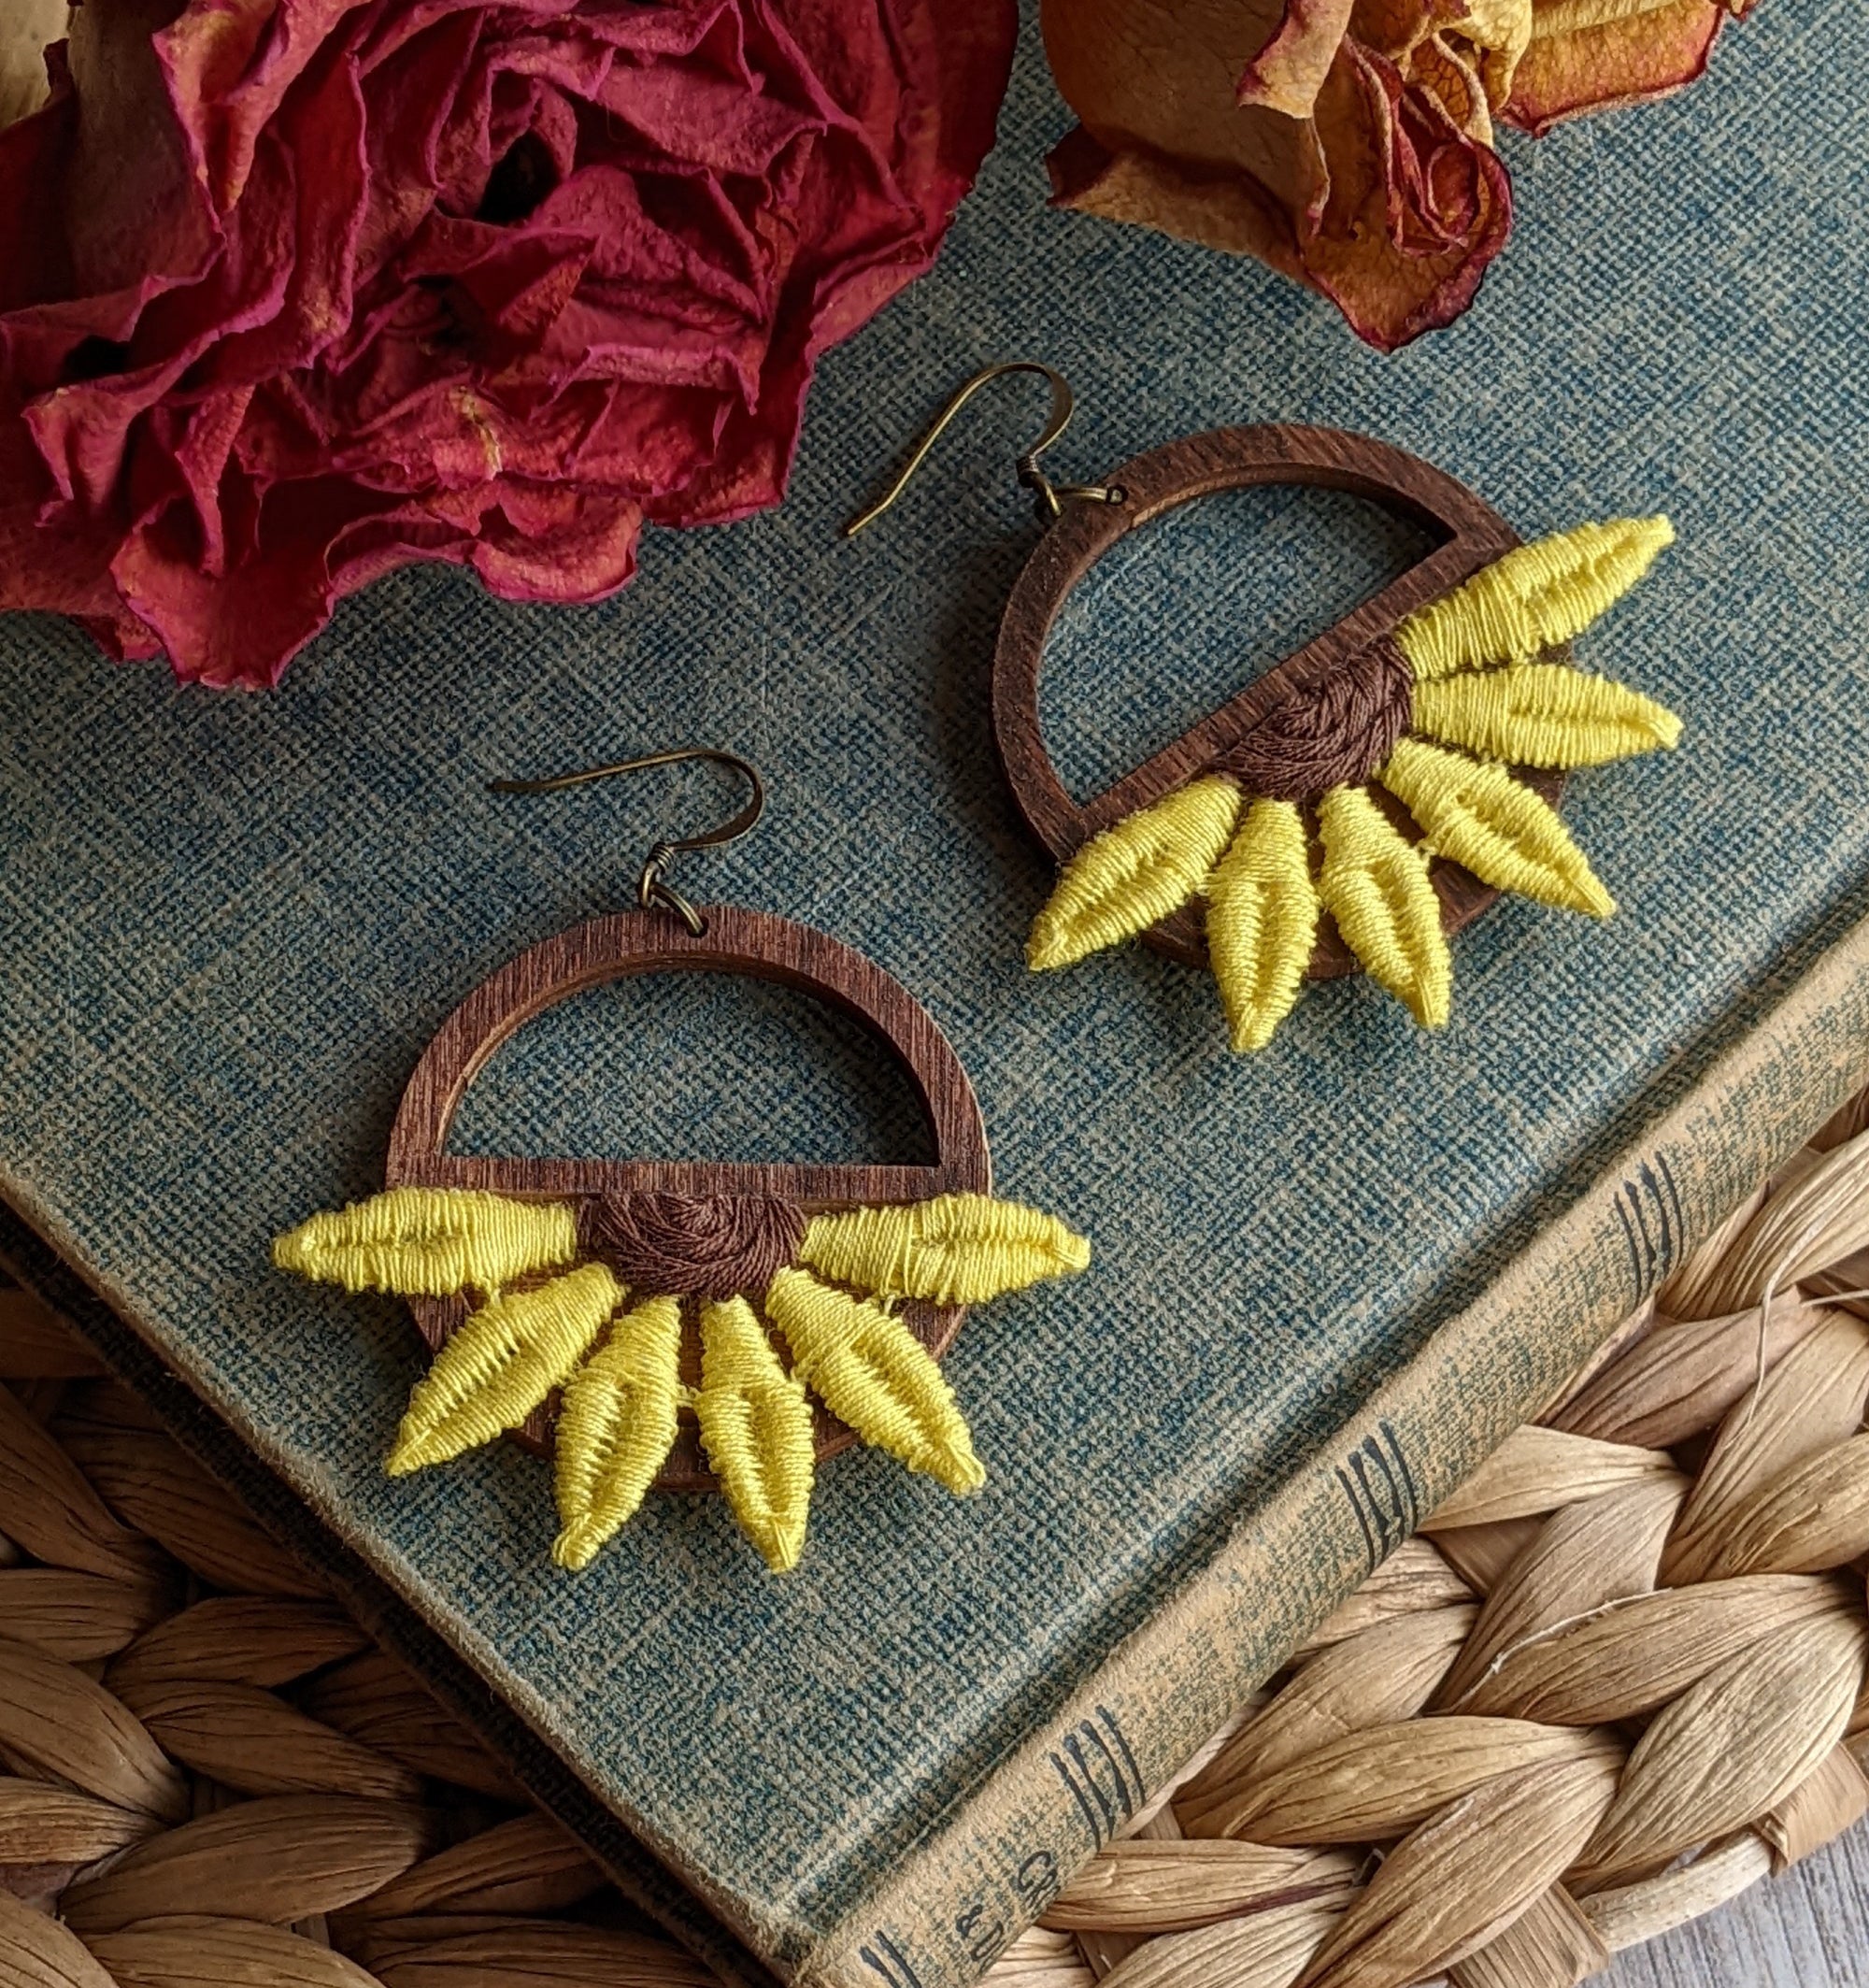 Gorgeous Boho Sunflower Earrings - Perfect for Vintage Engagement